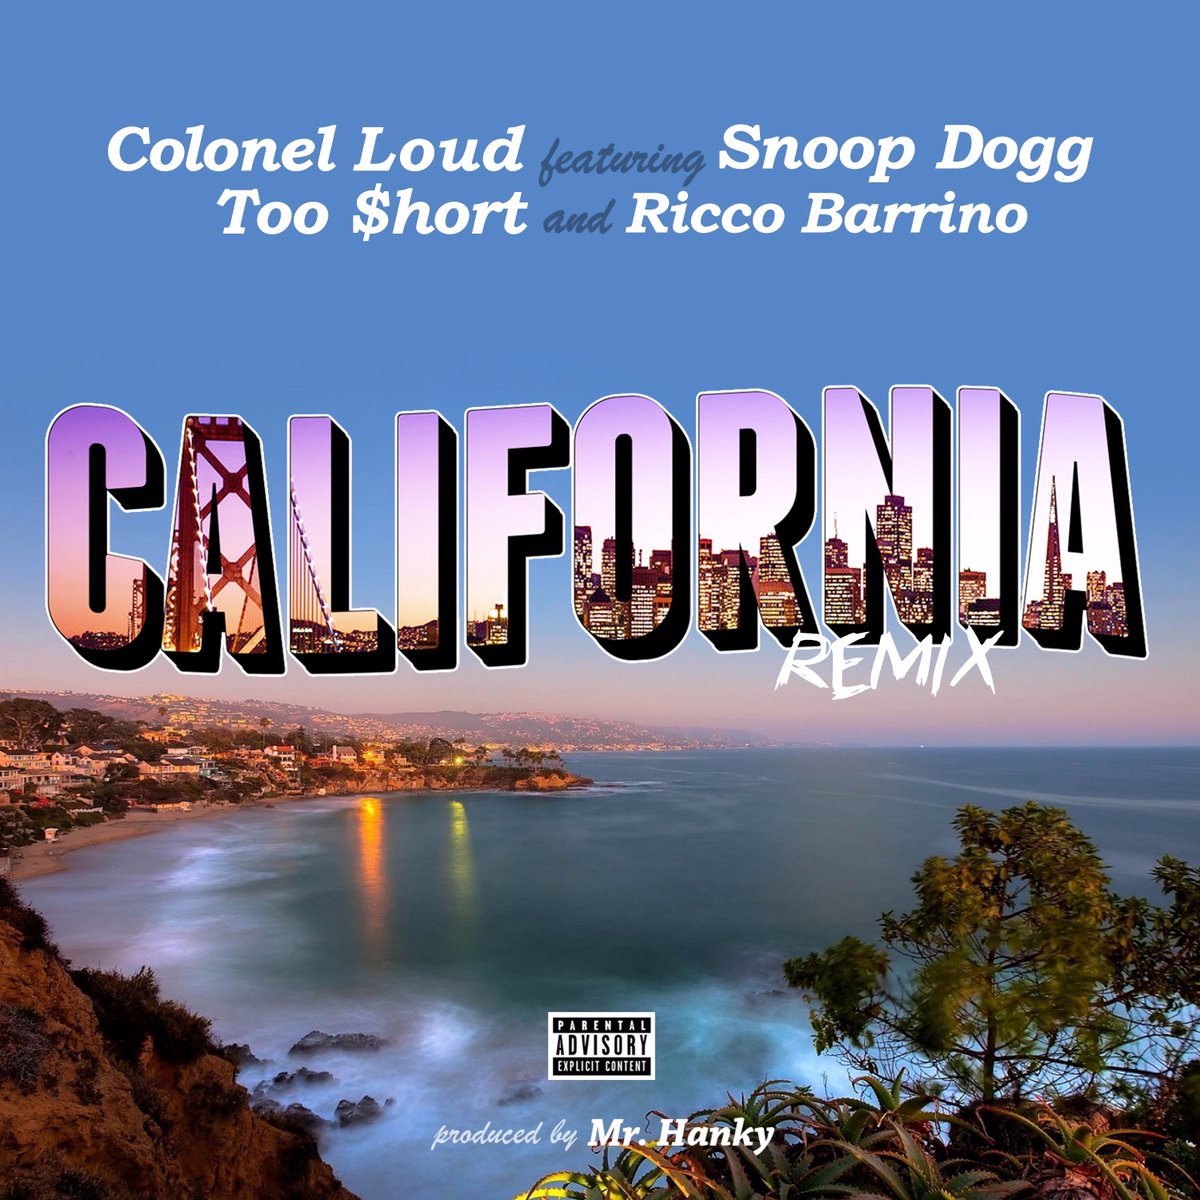 RT @EMPIRE: Listen to @TooShort & @SnoopDogg's verses on @ColonelLoud's new 